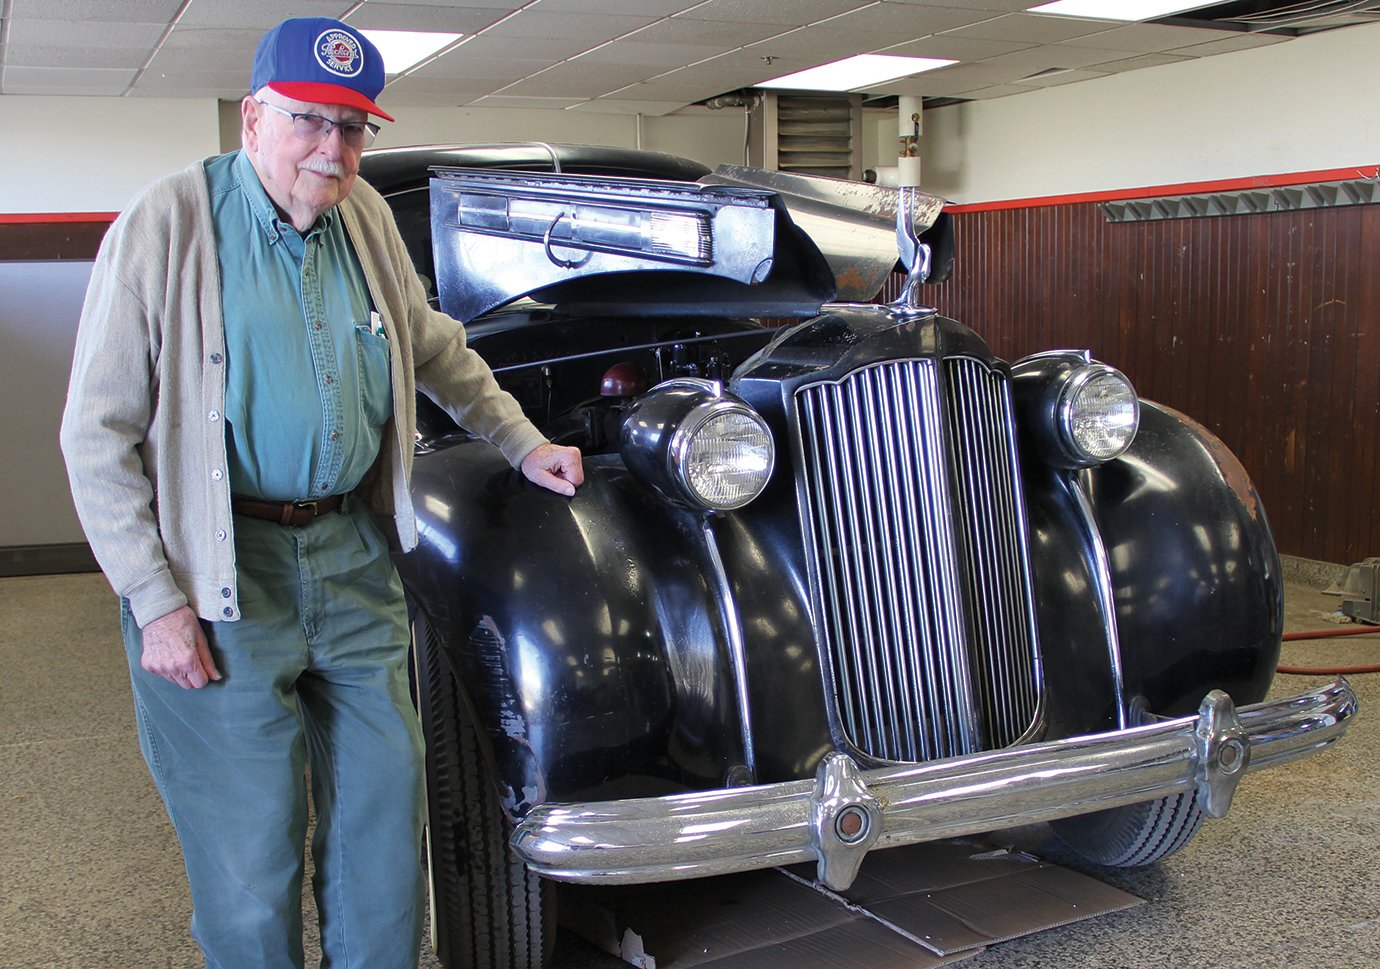 Charles Blackman stands next to a black vintage car